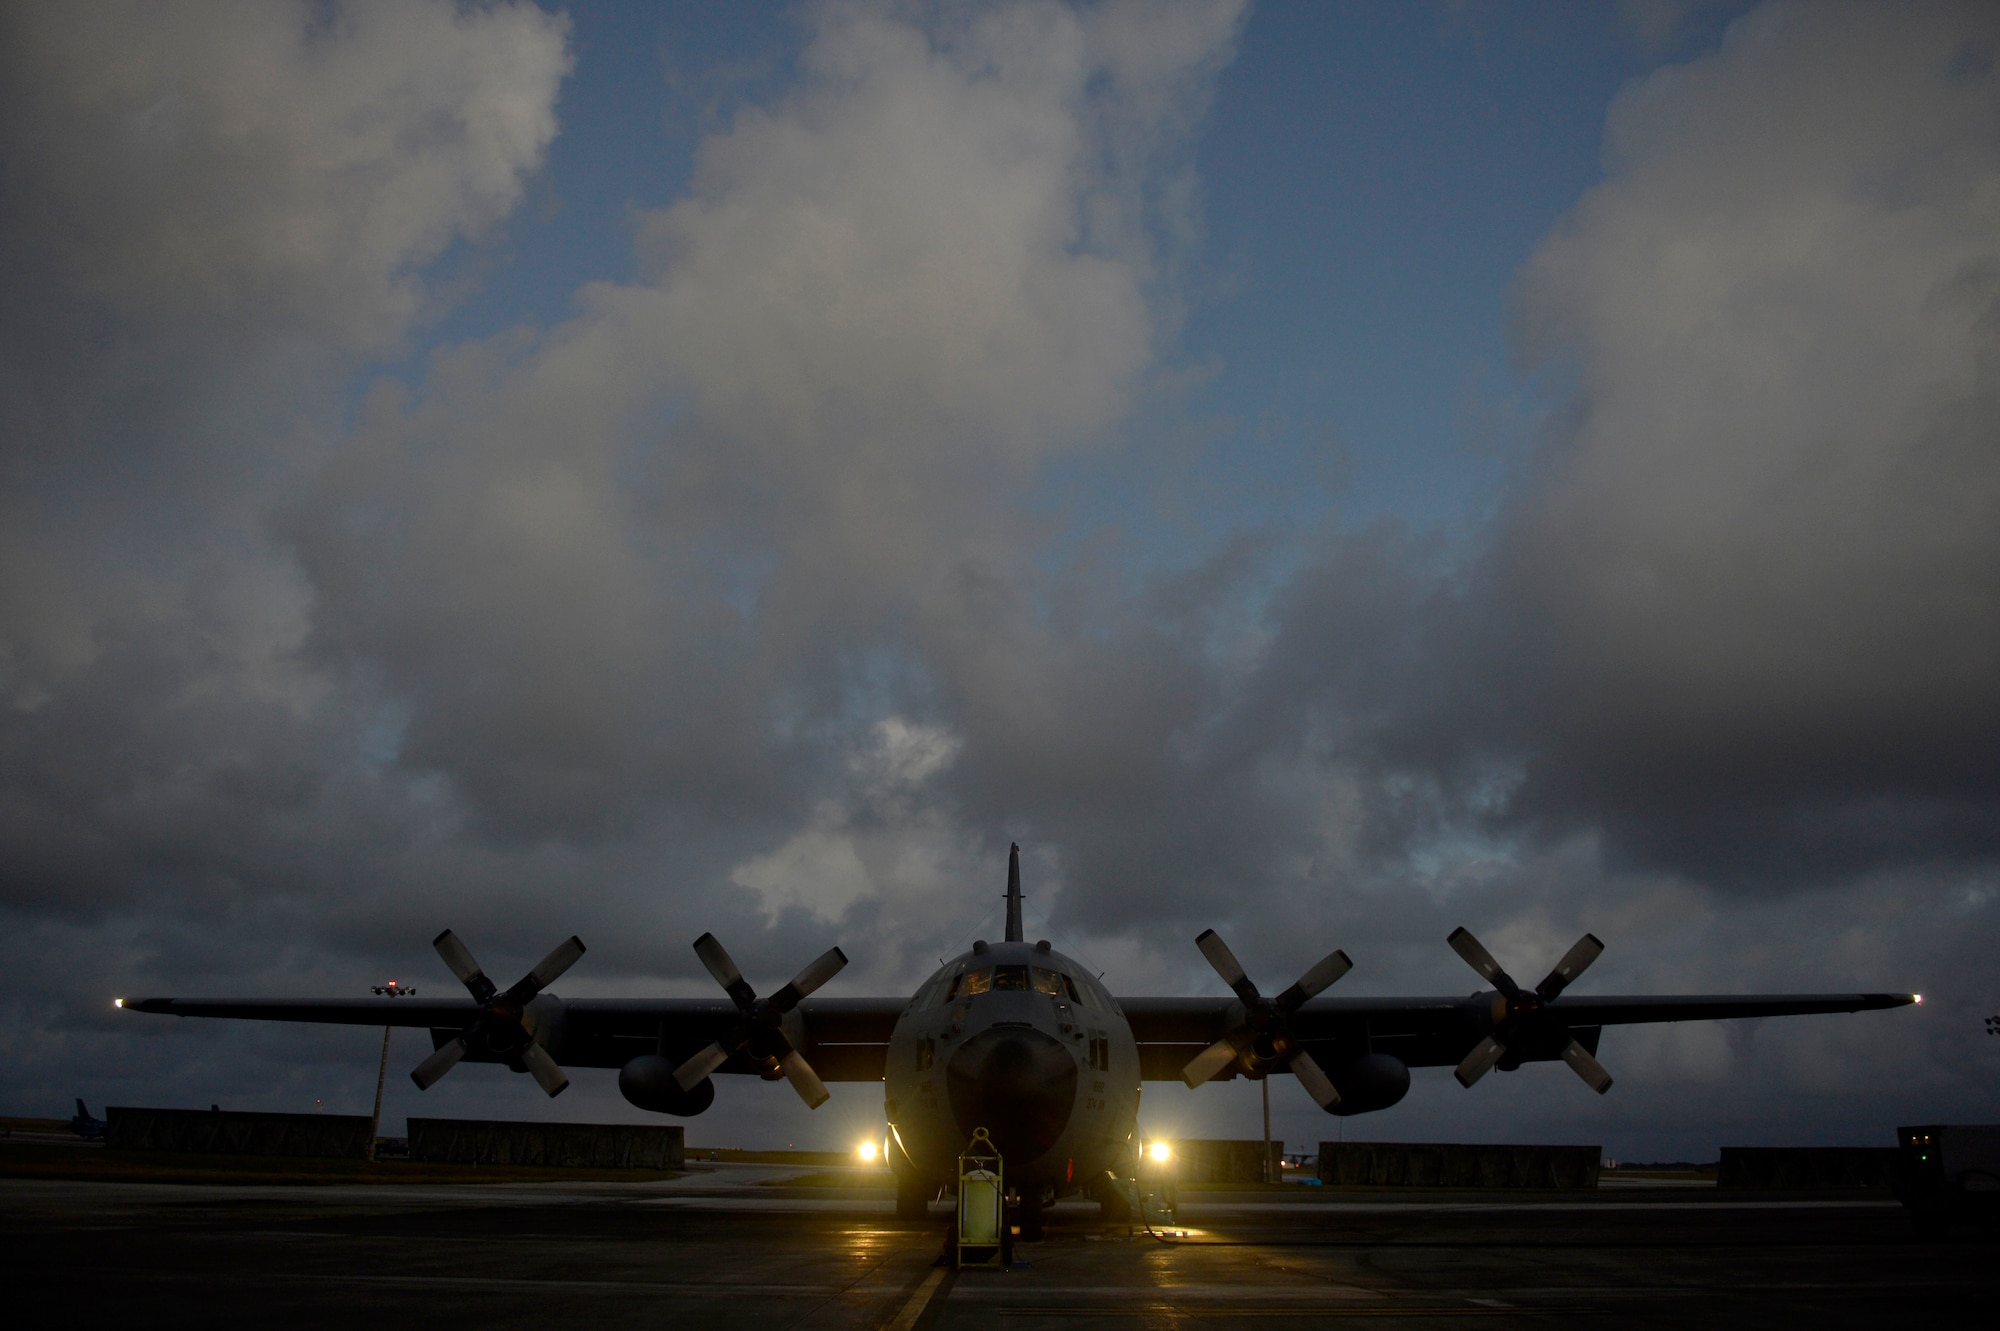 A U.S. Air Force C-130H sits on the ramp at Anderson Air Force Base, Guam before flying a humanitarian aid and disaster relief mission in support of Cope North 13, Feb. 6, 2013.  During the flight, the crew picked up passengers and cargo and delivered them to the islands of Saipan and Tinian. Cope North is an annual air combat tactics, humanitarian assistance and disaster relief exercise designed to increase the readiness and interoperability of the U.S. Air Force, Japan Air Self-Defense Force and Royal Australian Air Force. (U.S. Air Force photo by Senior Airman Matthew Bruch/Released)